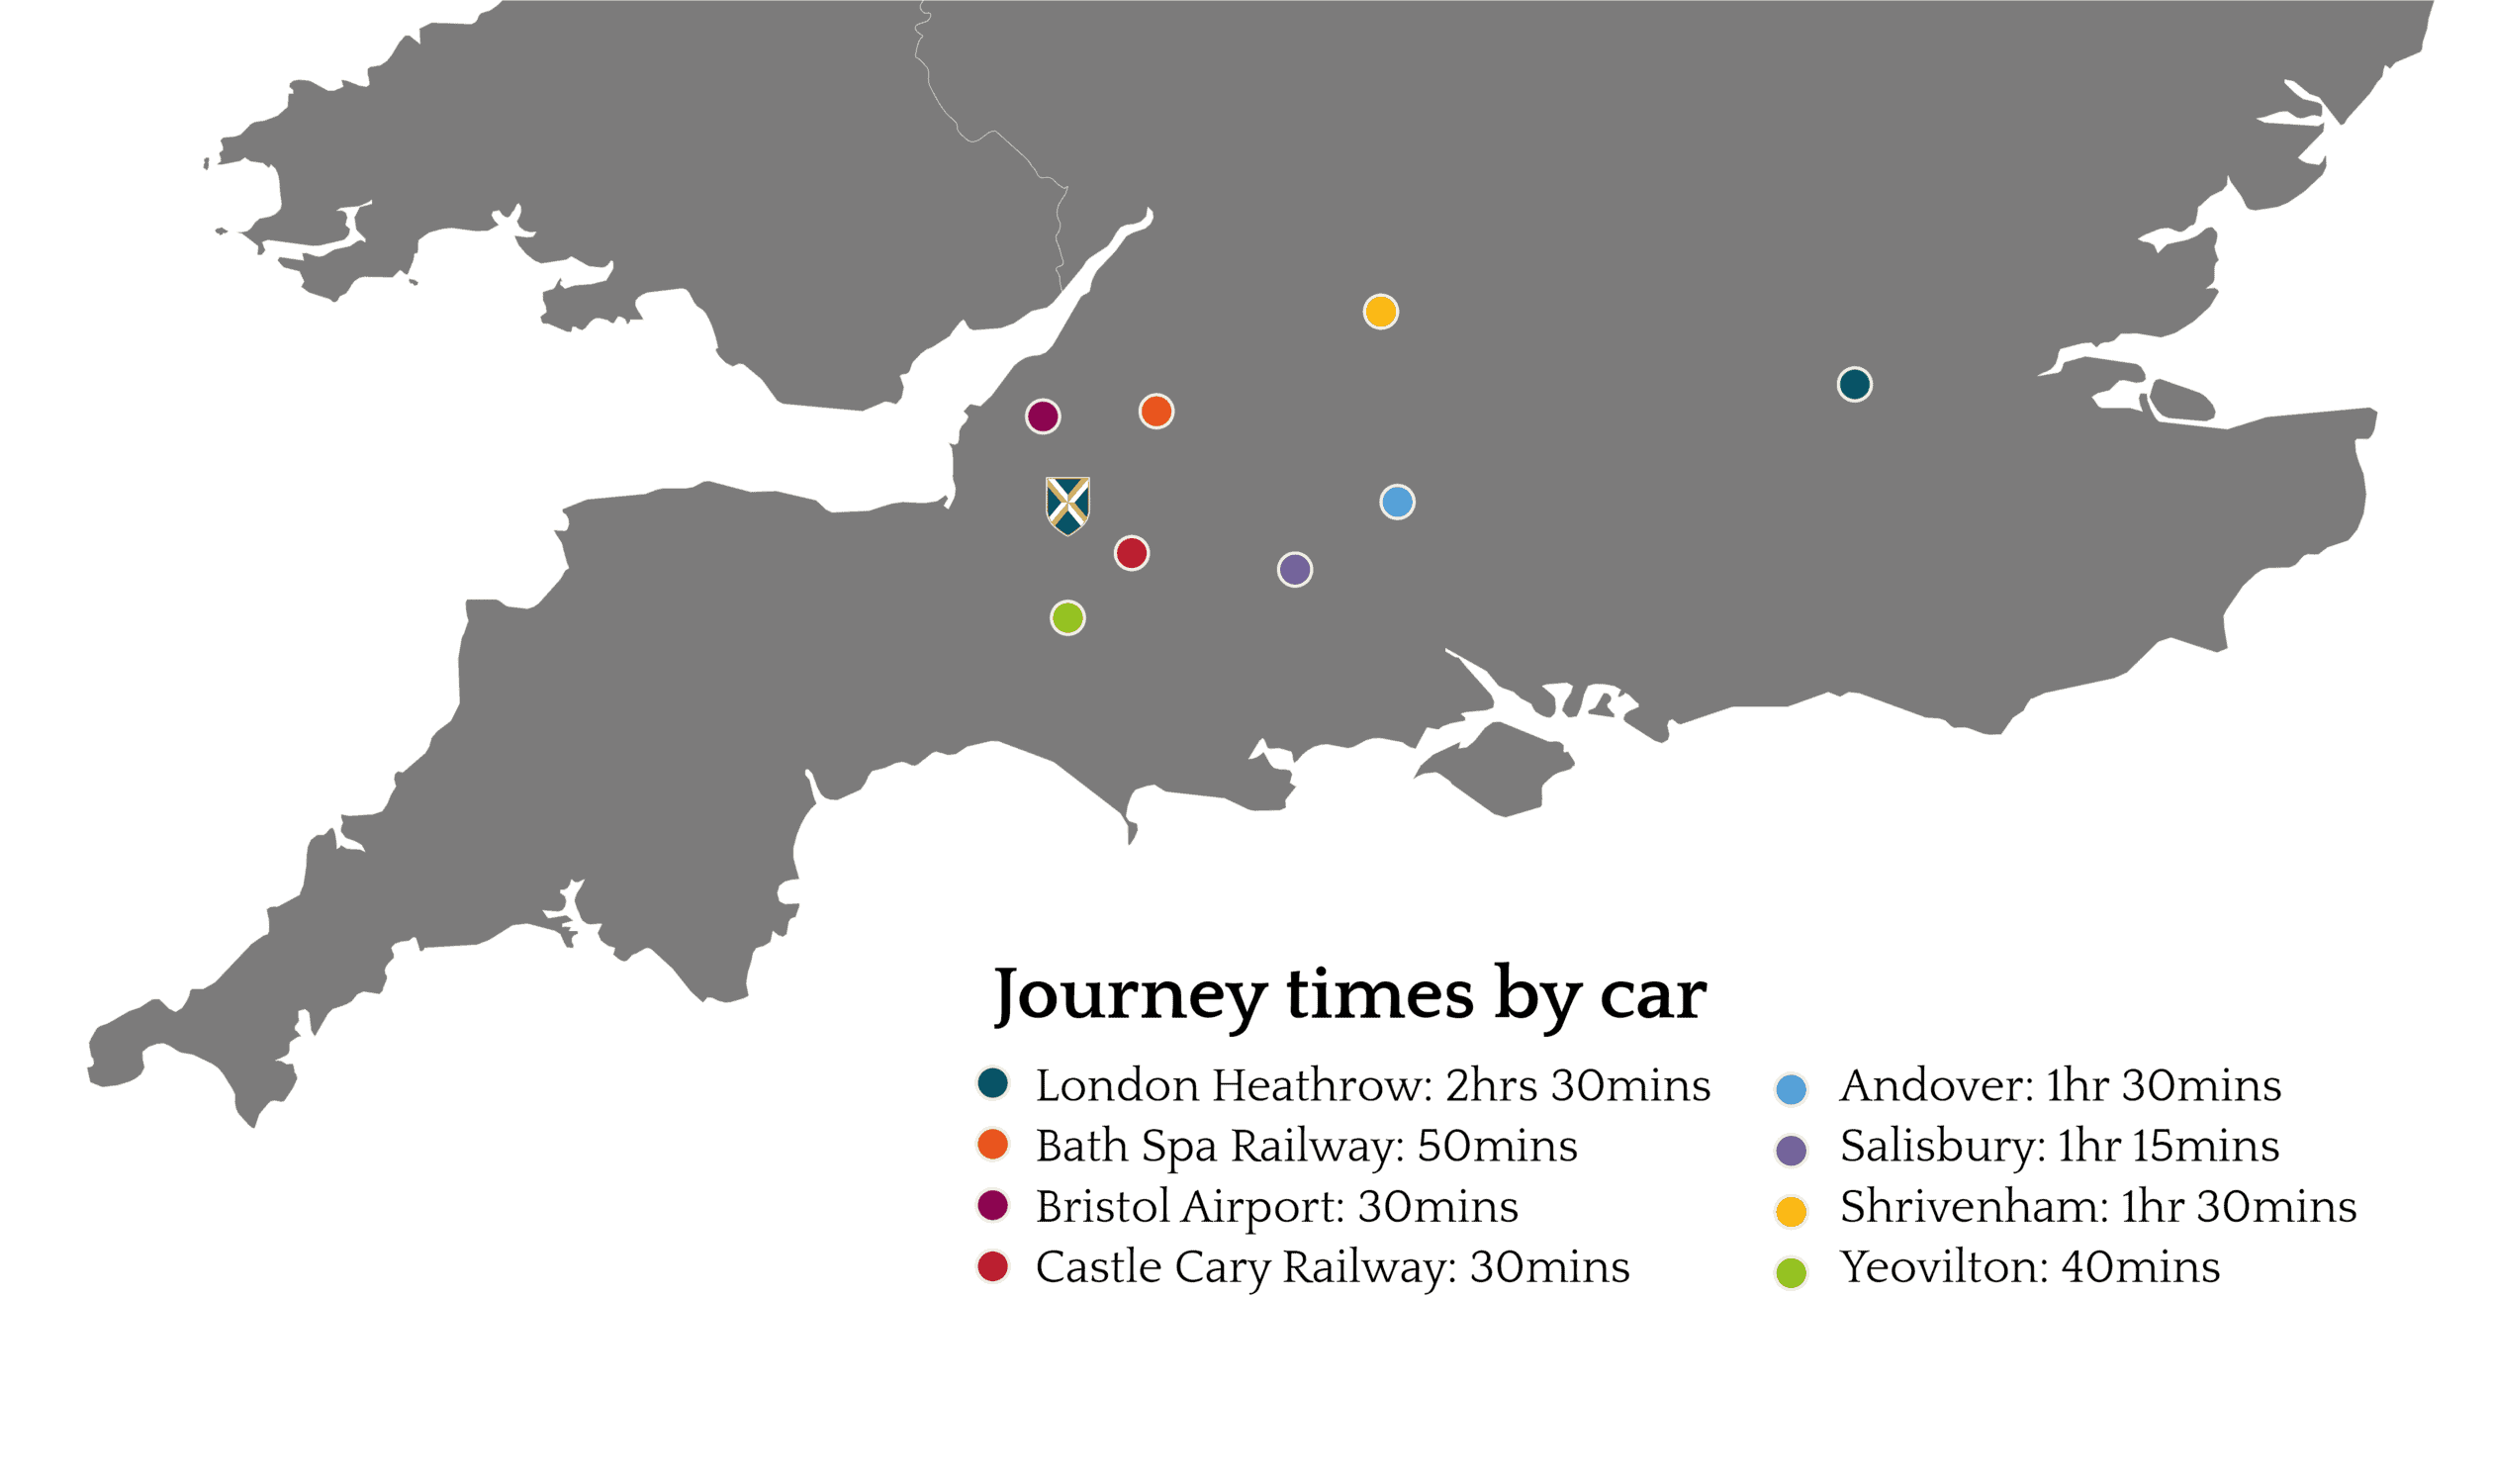 Map of Southern UK with a key to show journey times to key airports, train stations and military bases